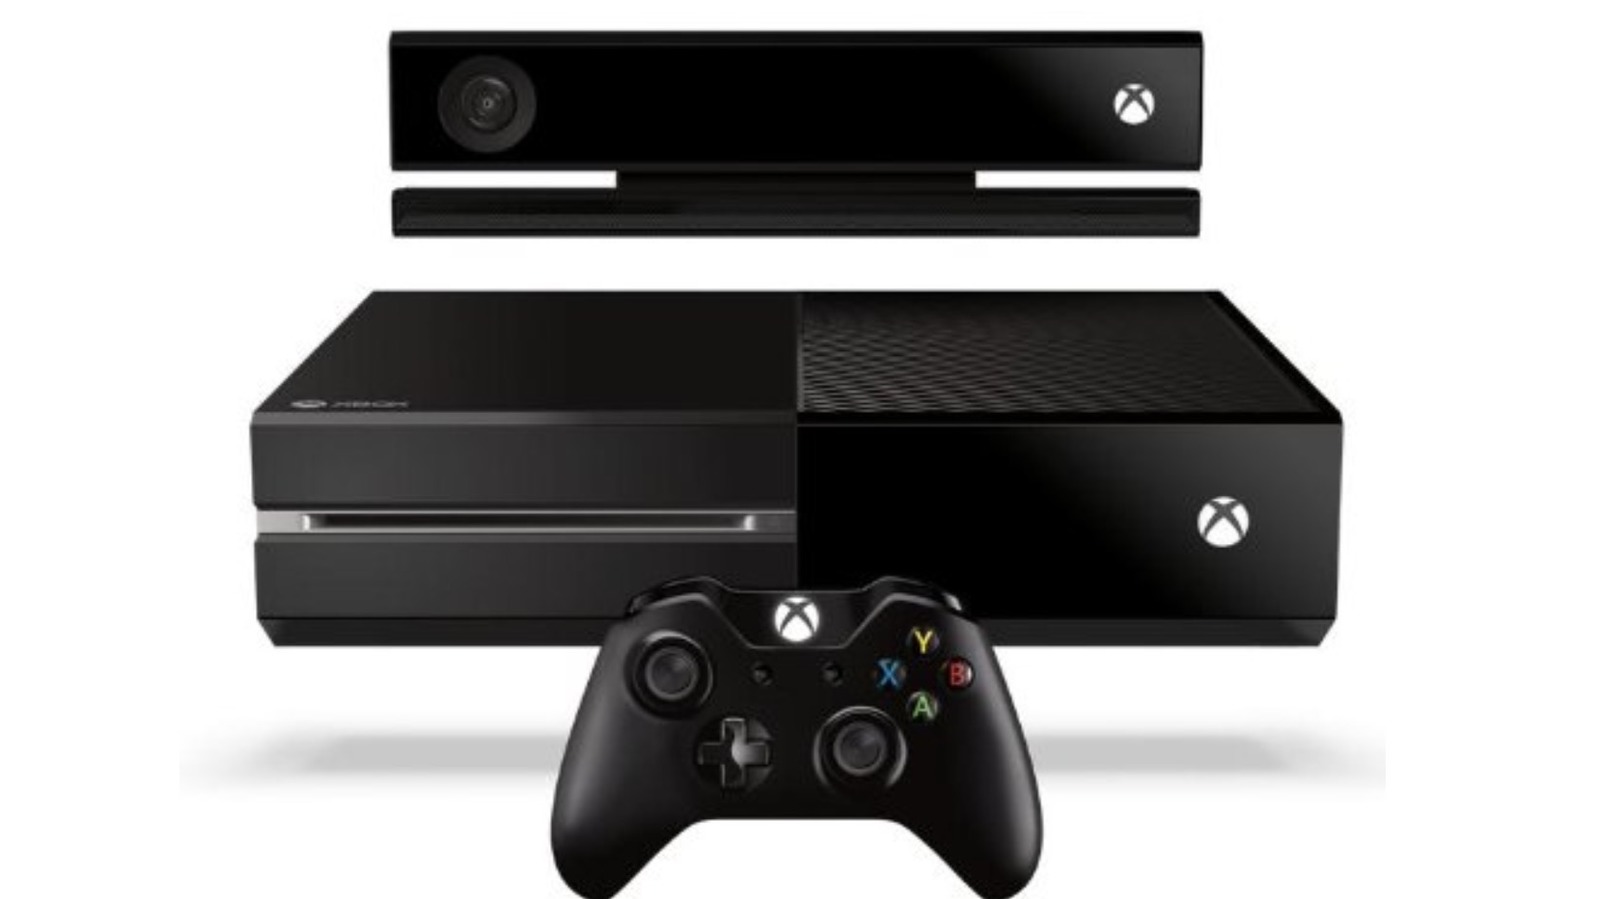 Microsoft is no longer developing Xbox One games — here's what that means